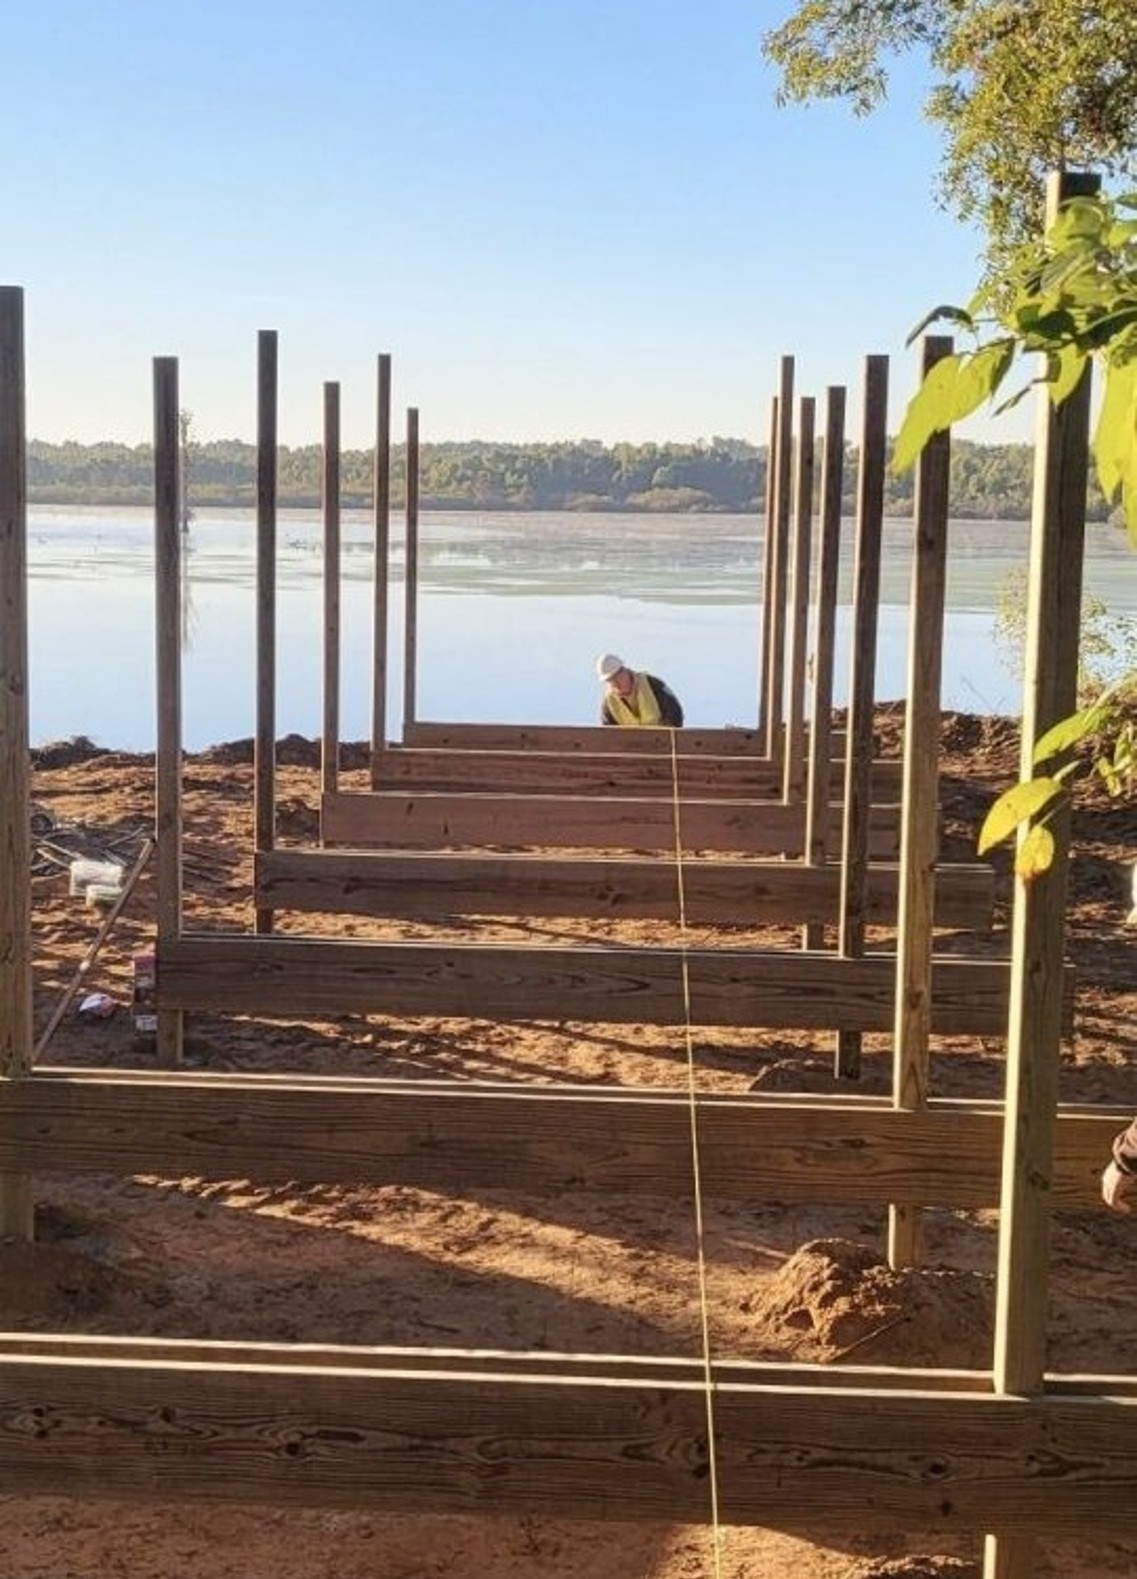 Construction worker stands at the end of new boardwalk base with lake in the background.